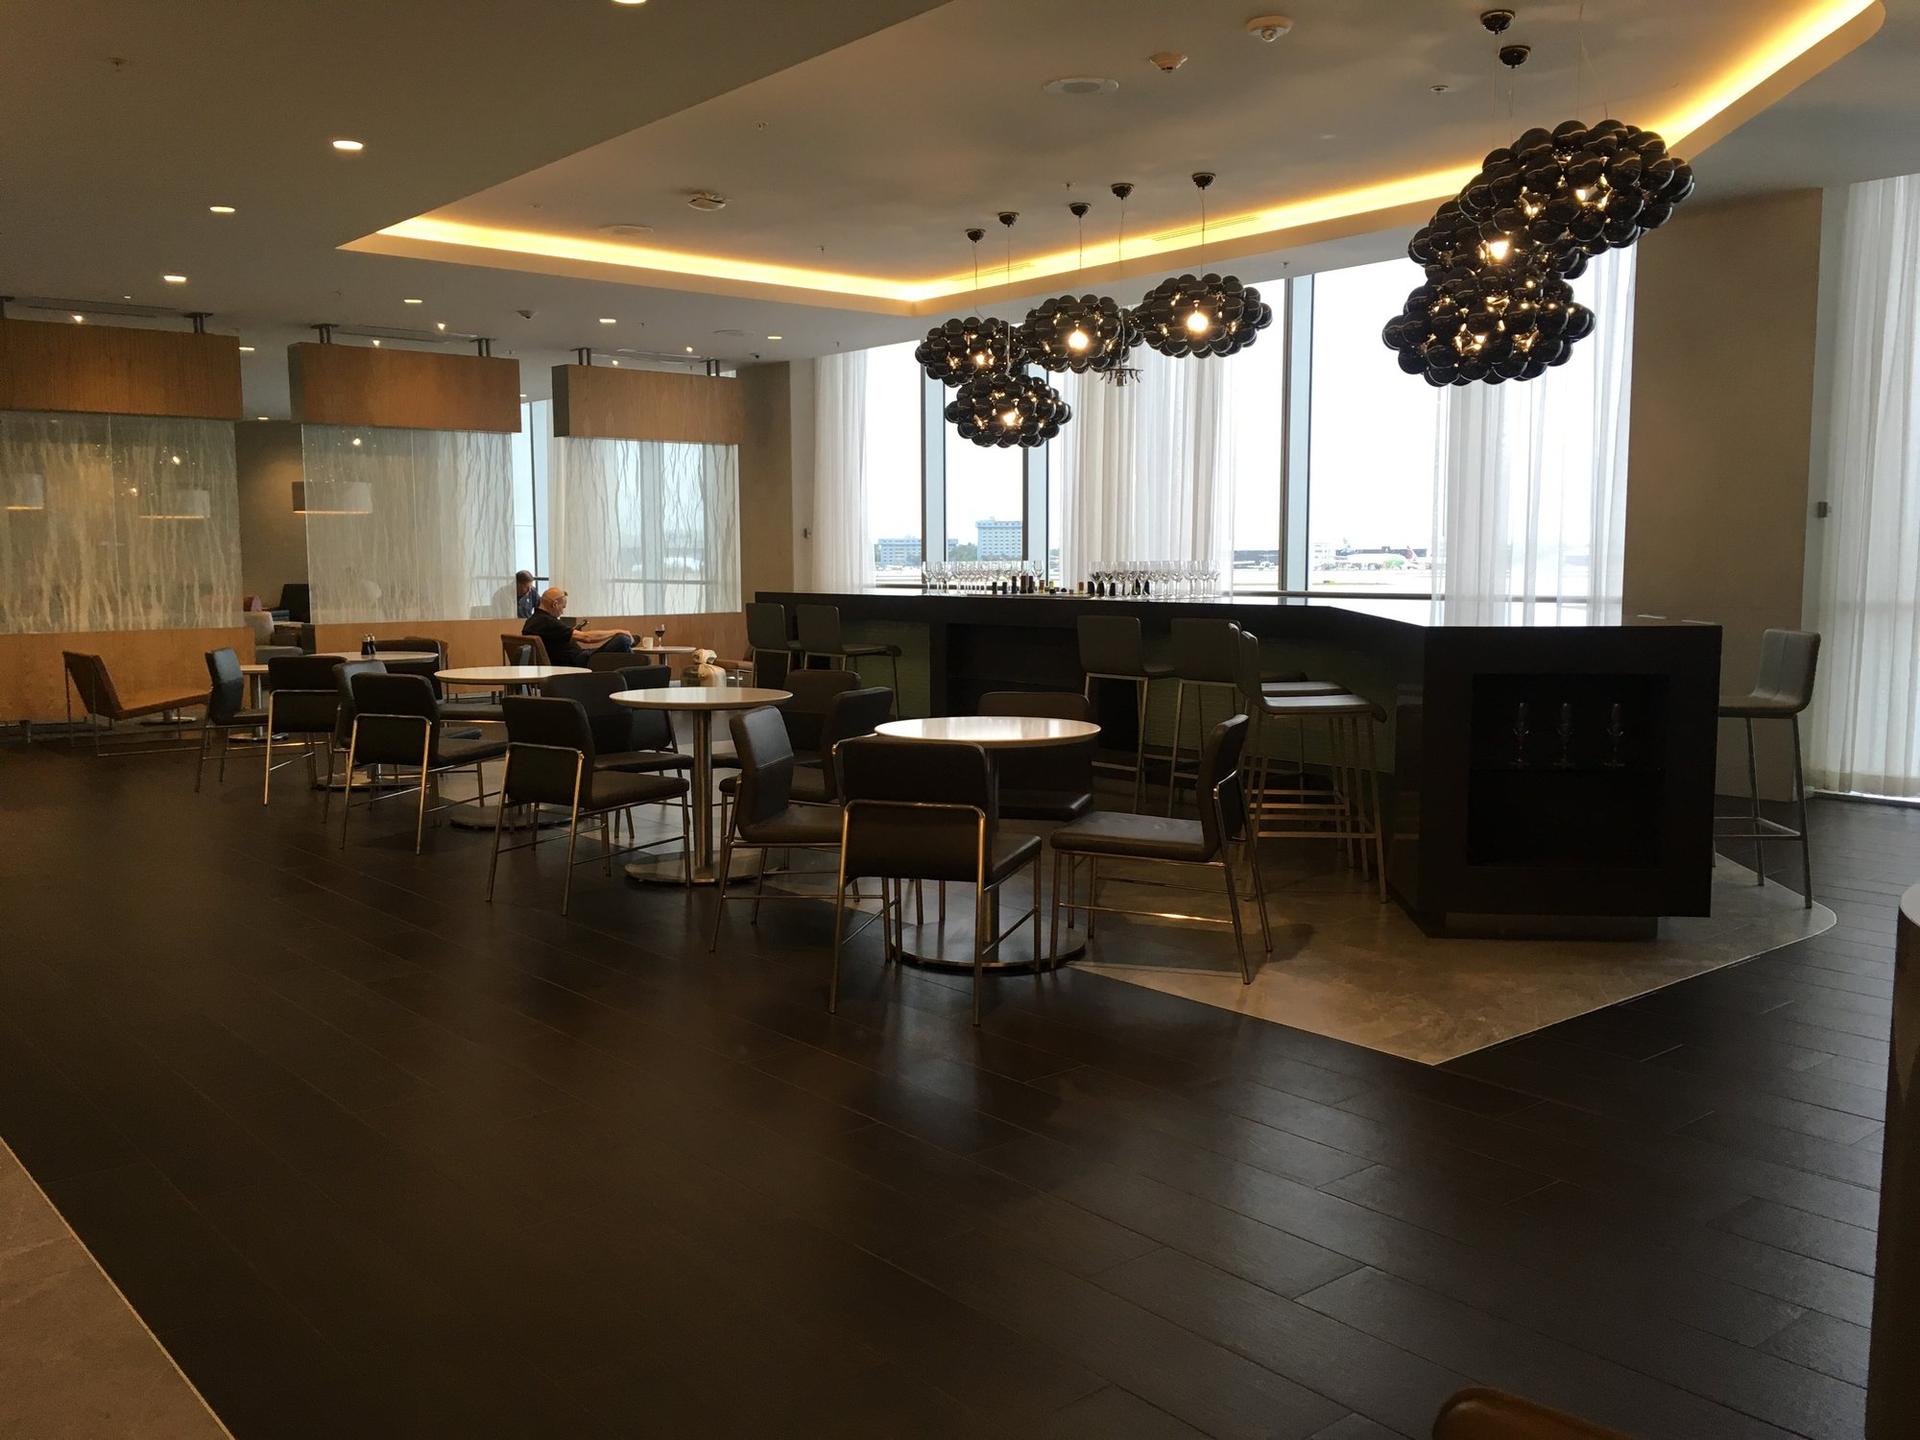 American Airlines Flagship Lounge image 34 of 65